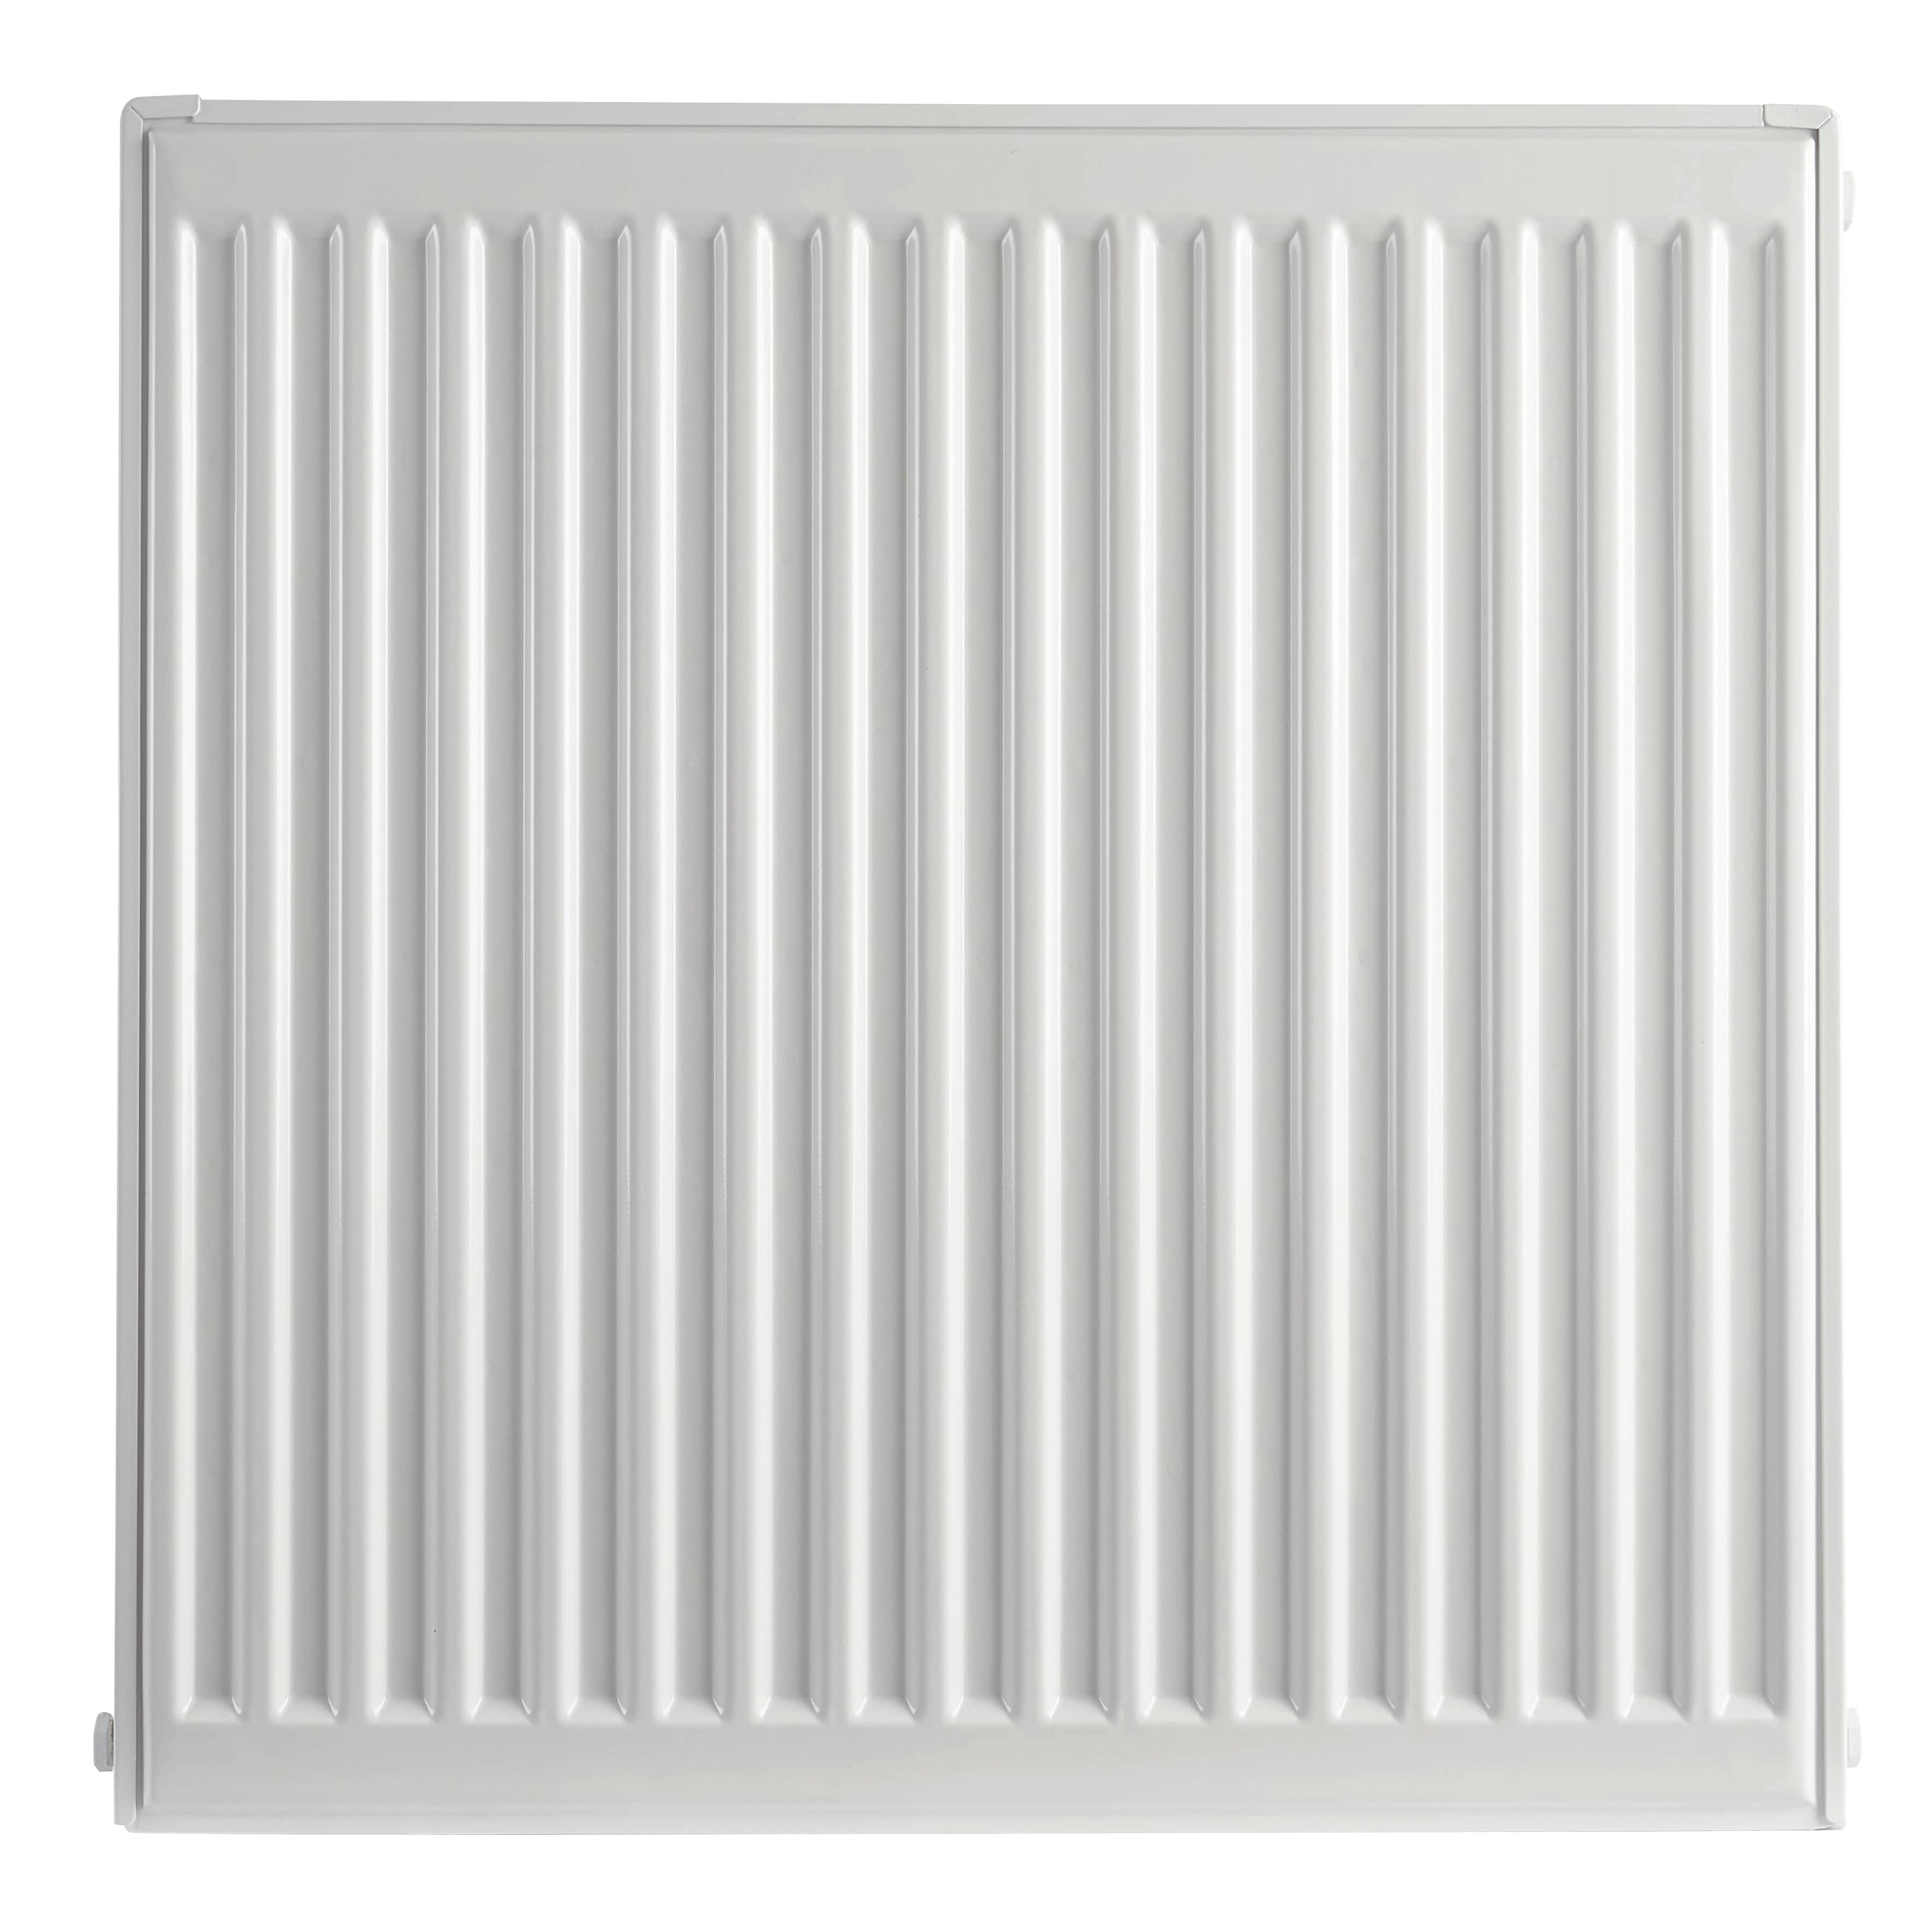 Image of Homeline by Stelrad 700 x 400mm Type 22 Double Panel Premium Double Convector Radiator